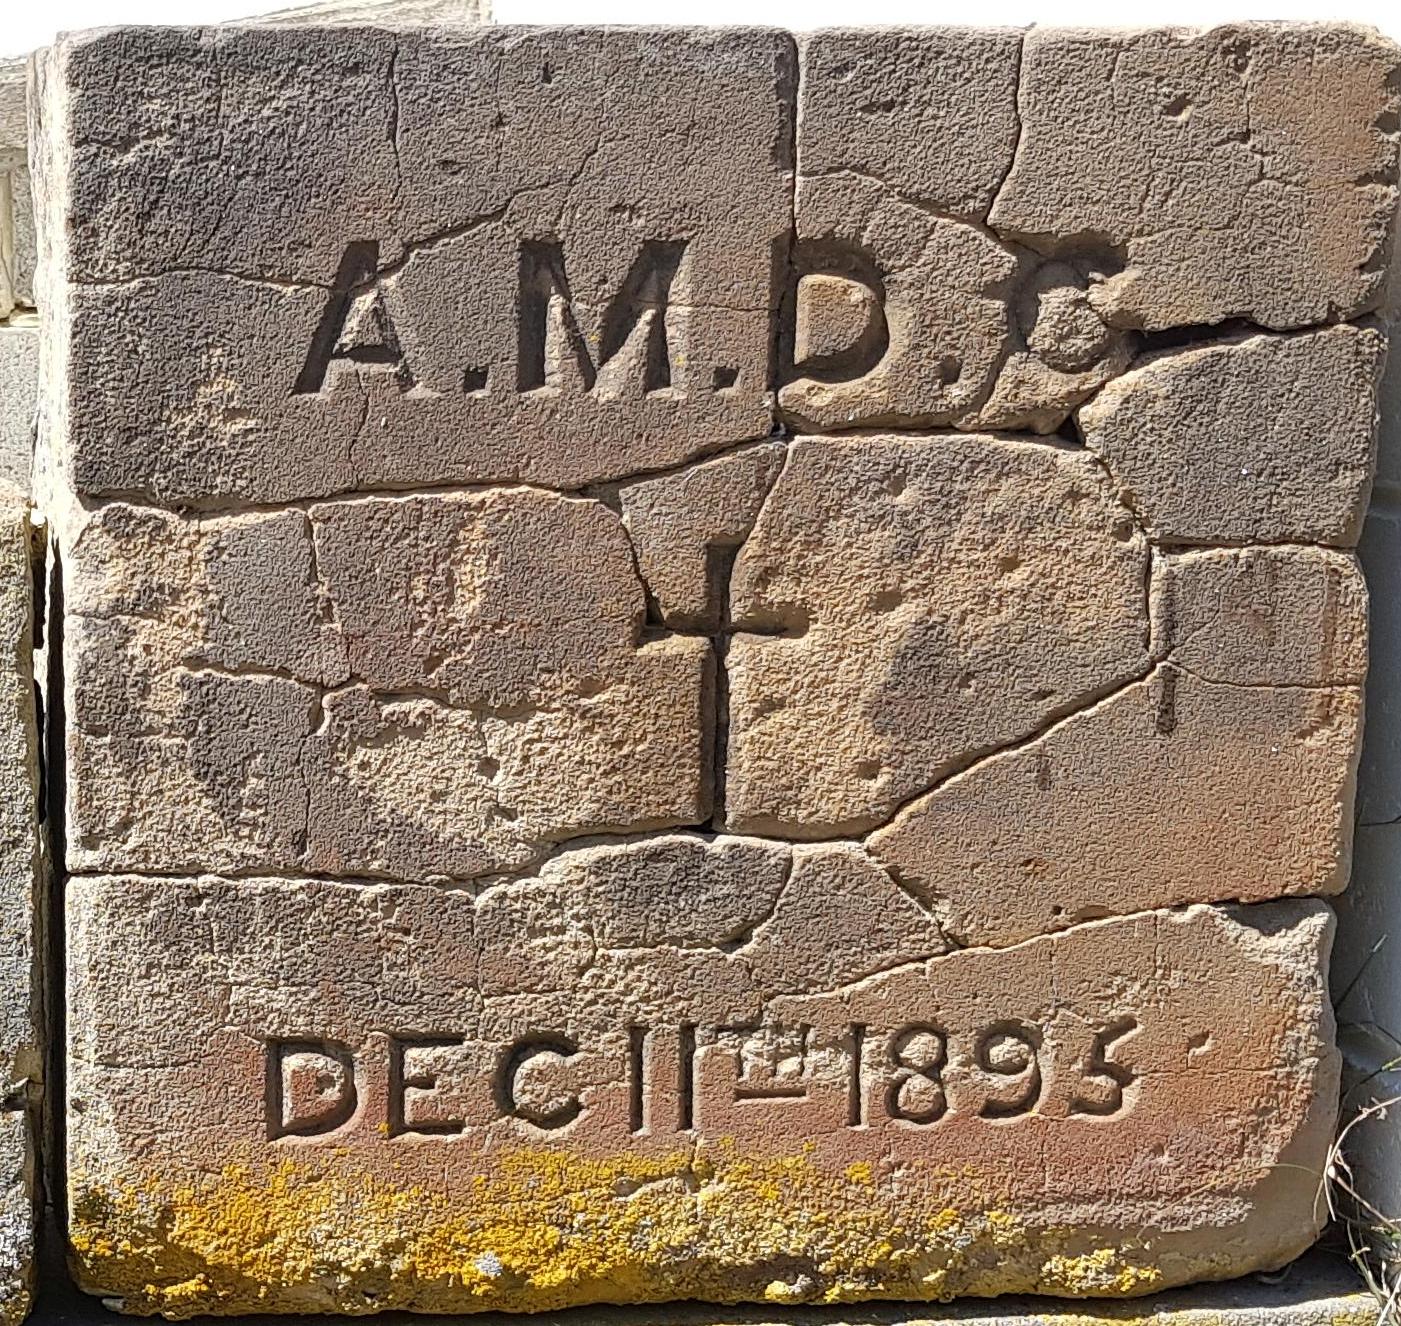 Foundation Stone, St Peters Barnes Bay